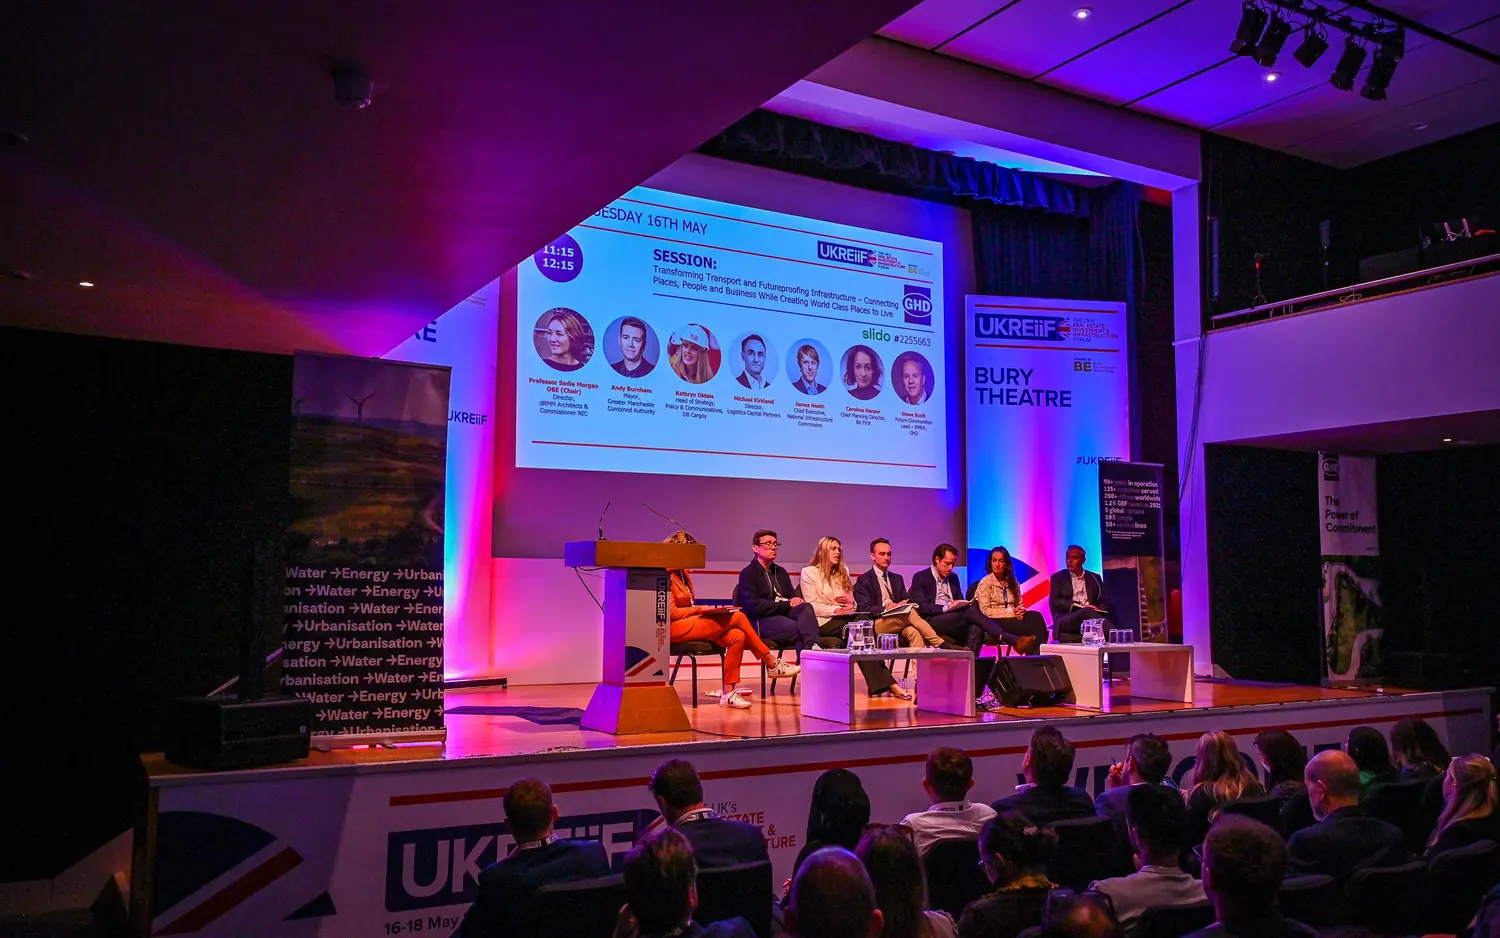 Presentation on stage during the UKREiiF Event